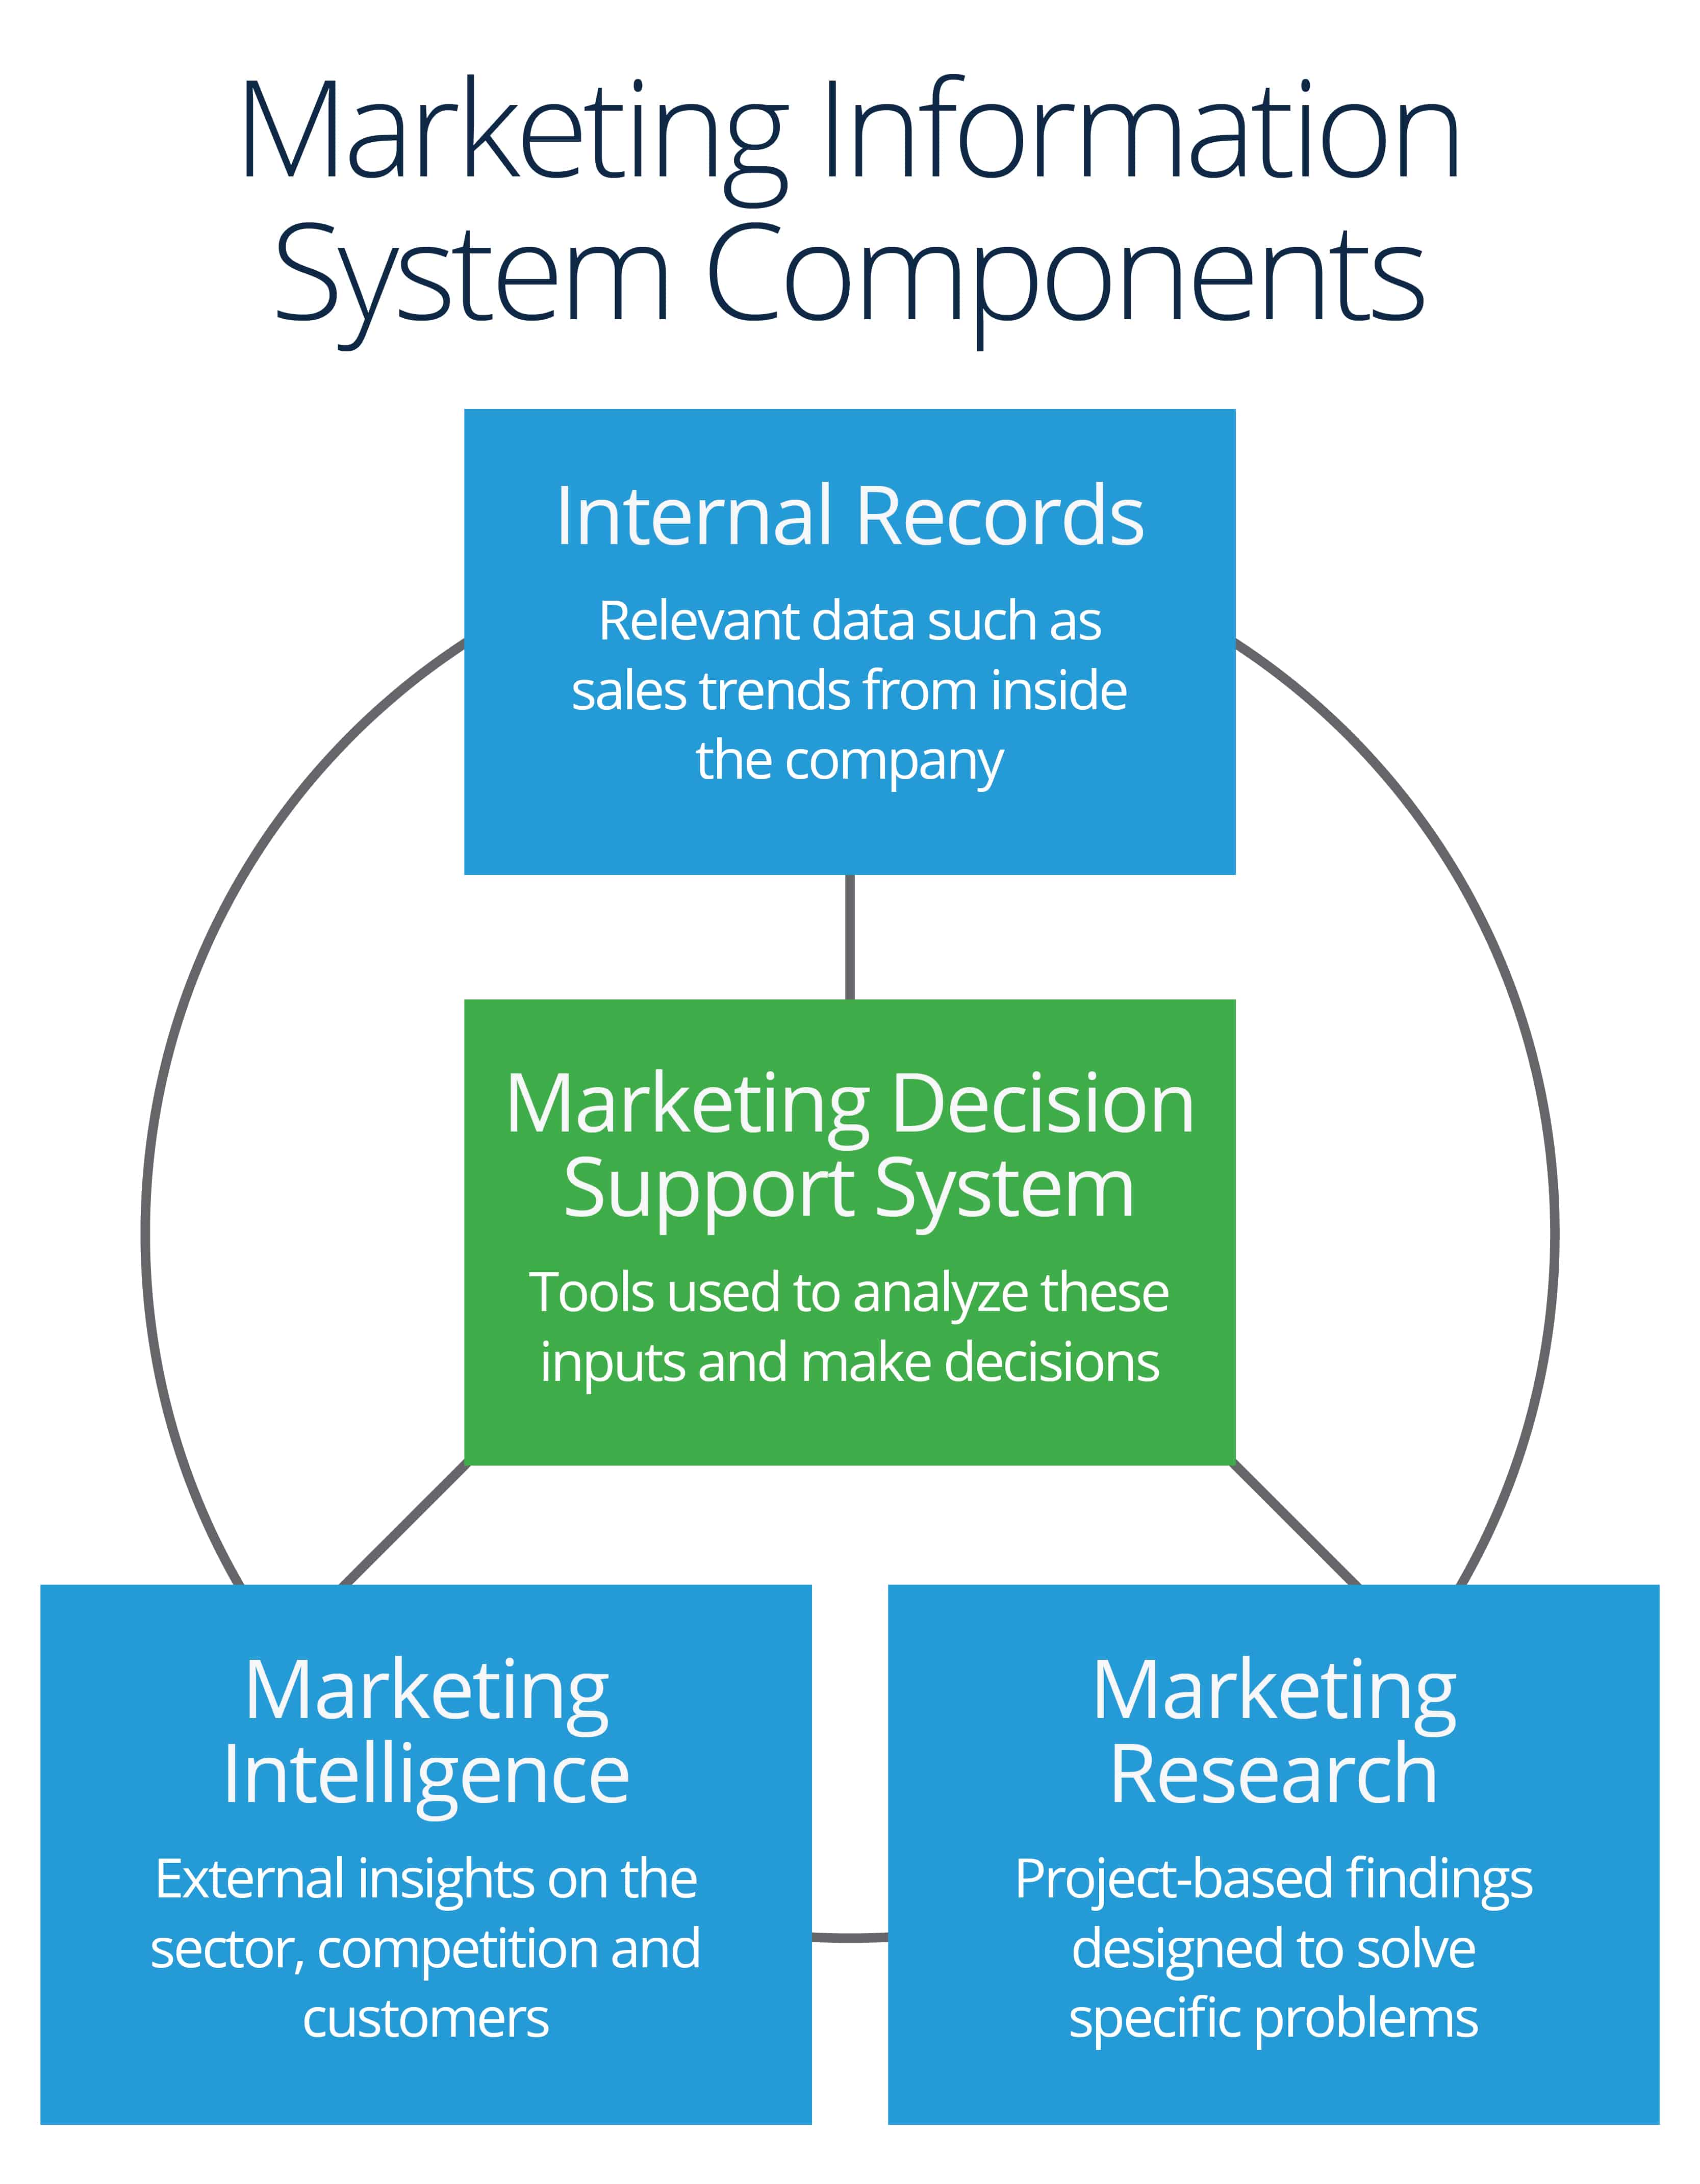 Marketing Information Components